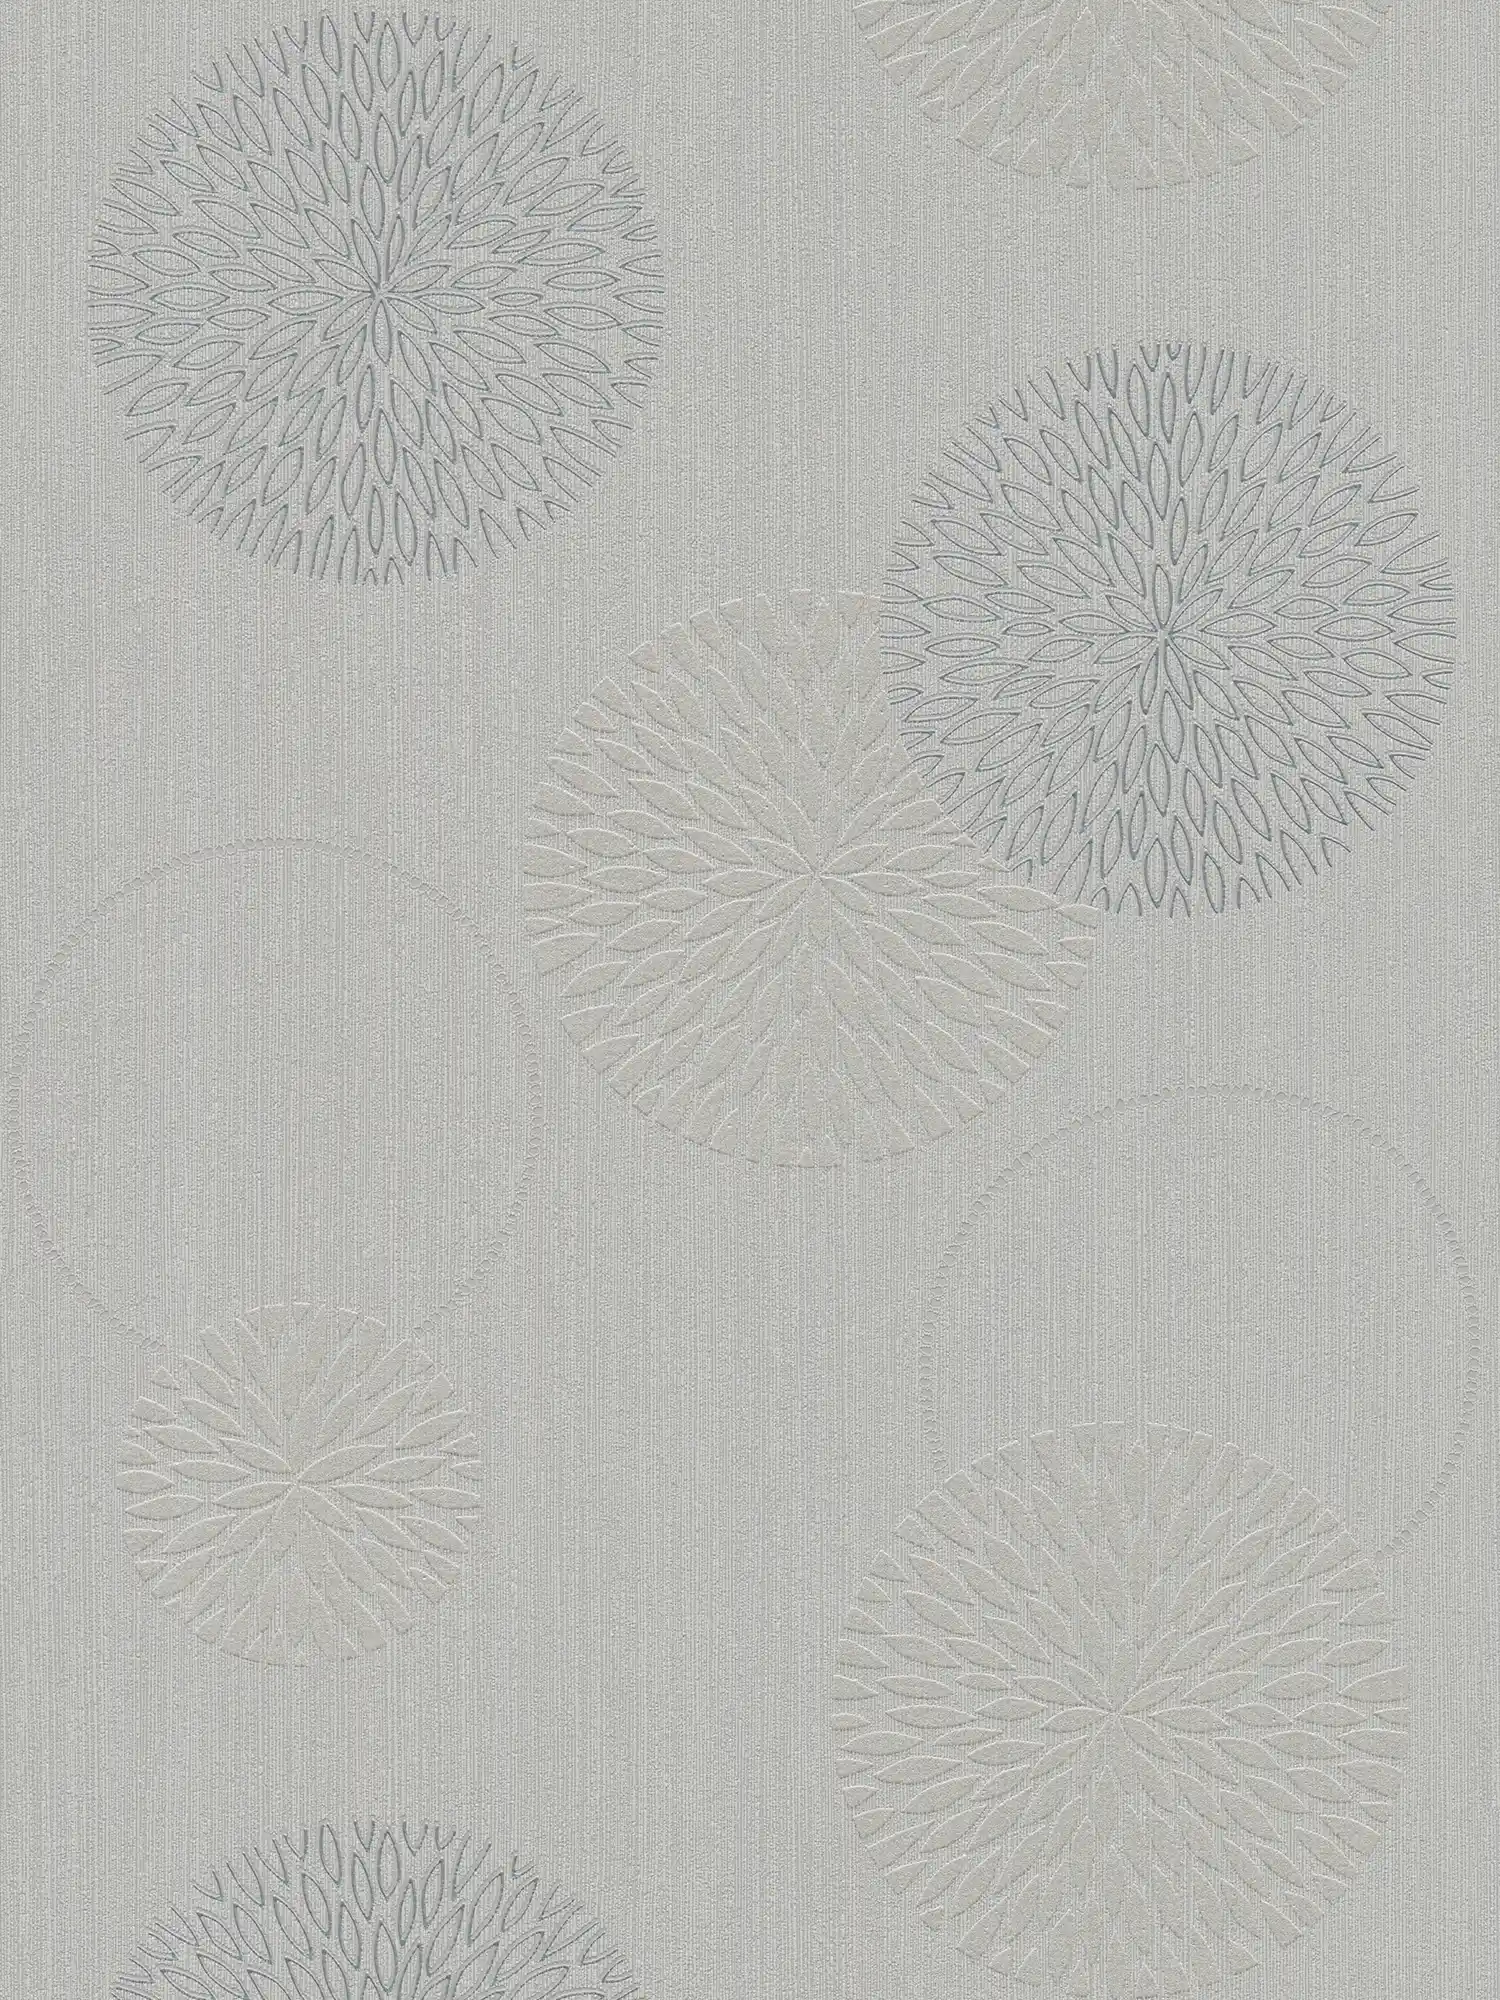 Non-woven wallpaper flowers in abstract design - grey
